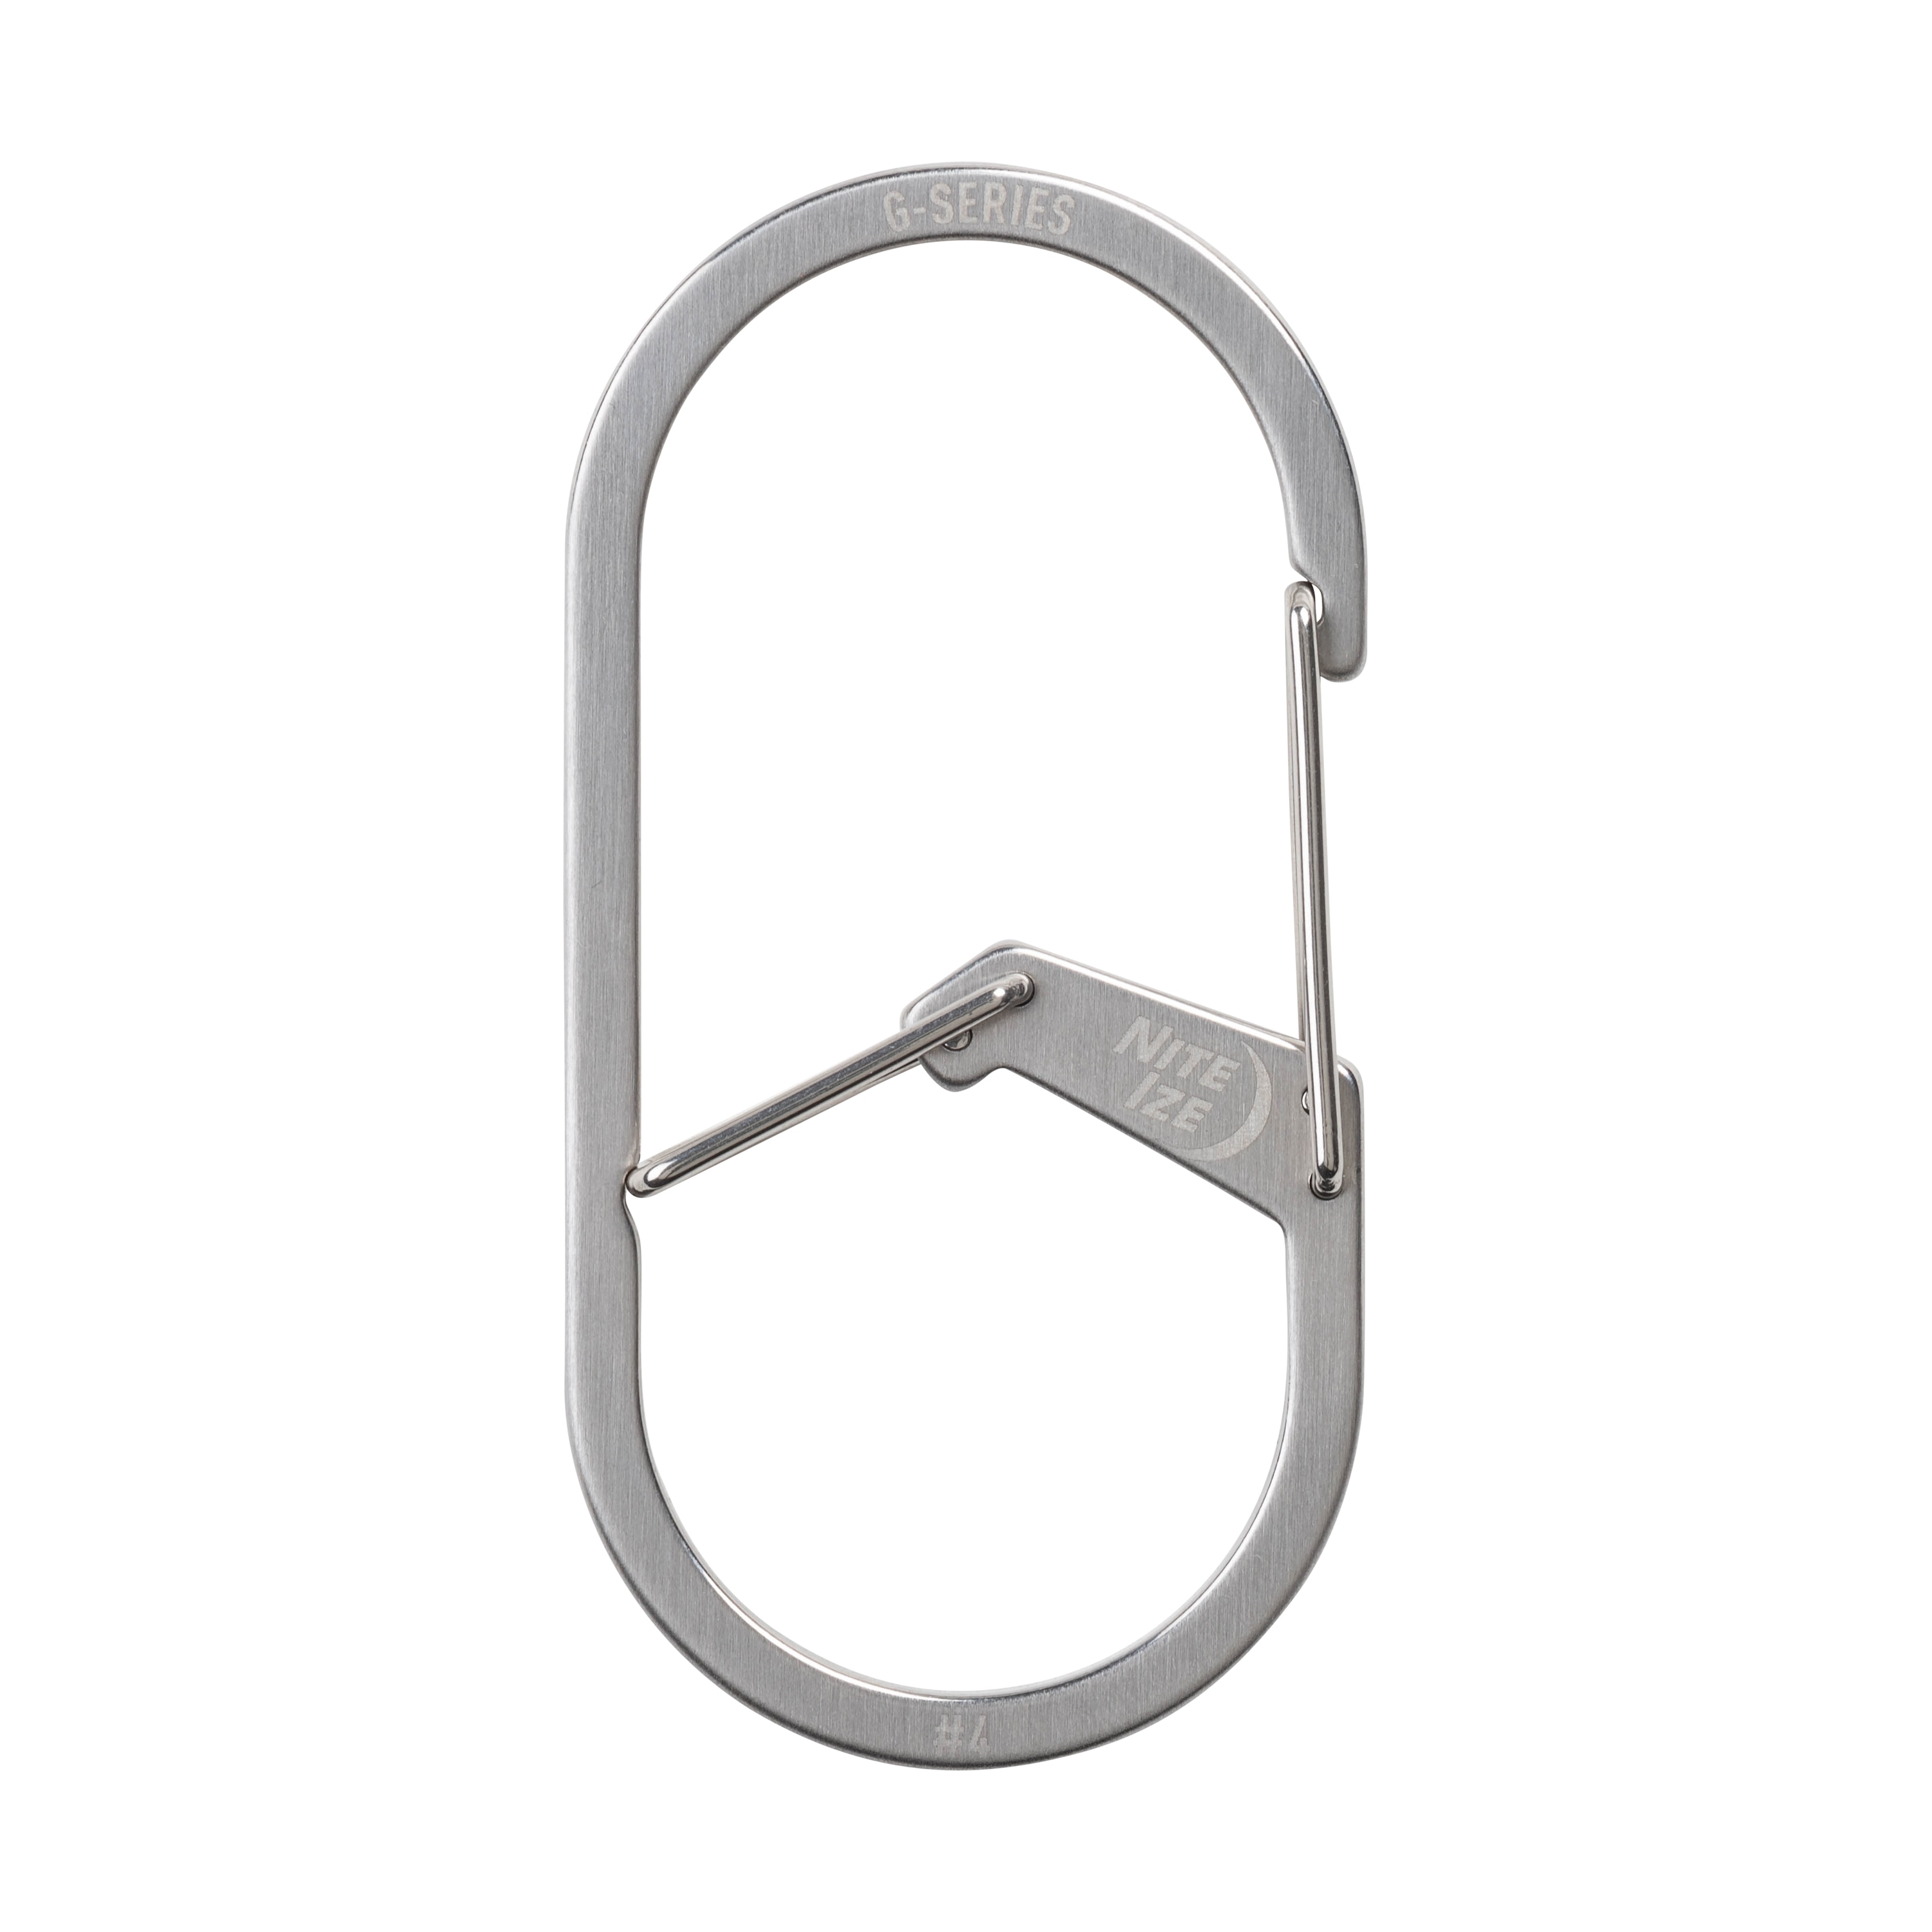 Nite Ize G-Series Dual Chamber Carabiner #4 - Stainless Steel